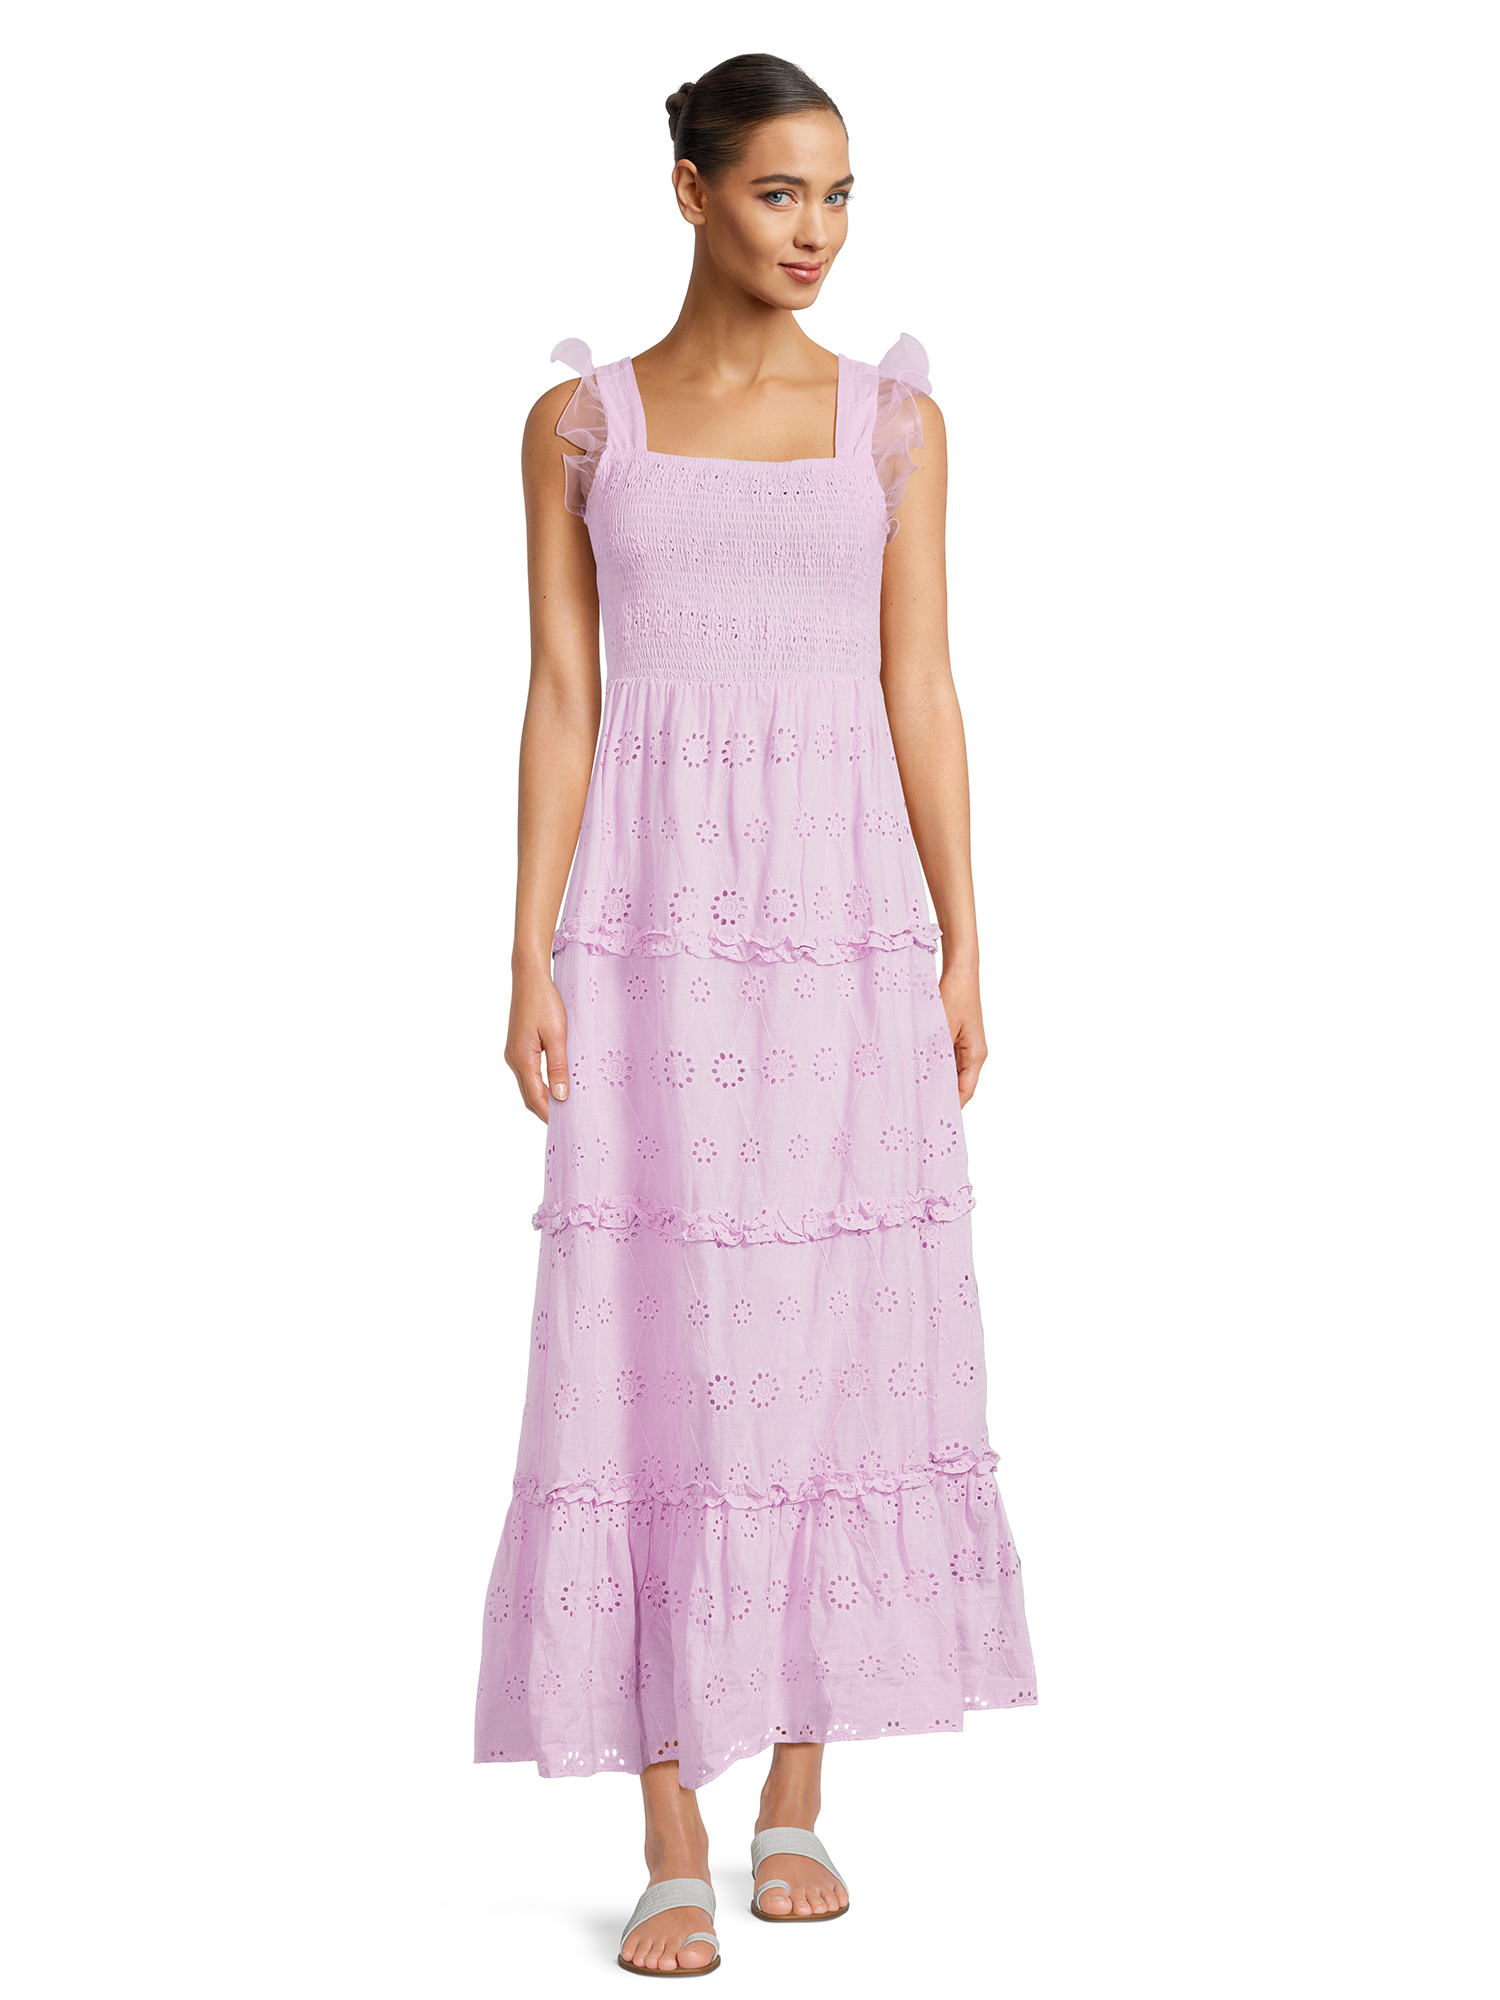 Label Rail x CheapChicFinds Women's Tiered Broderie Maxi Dress - image 3 of 7